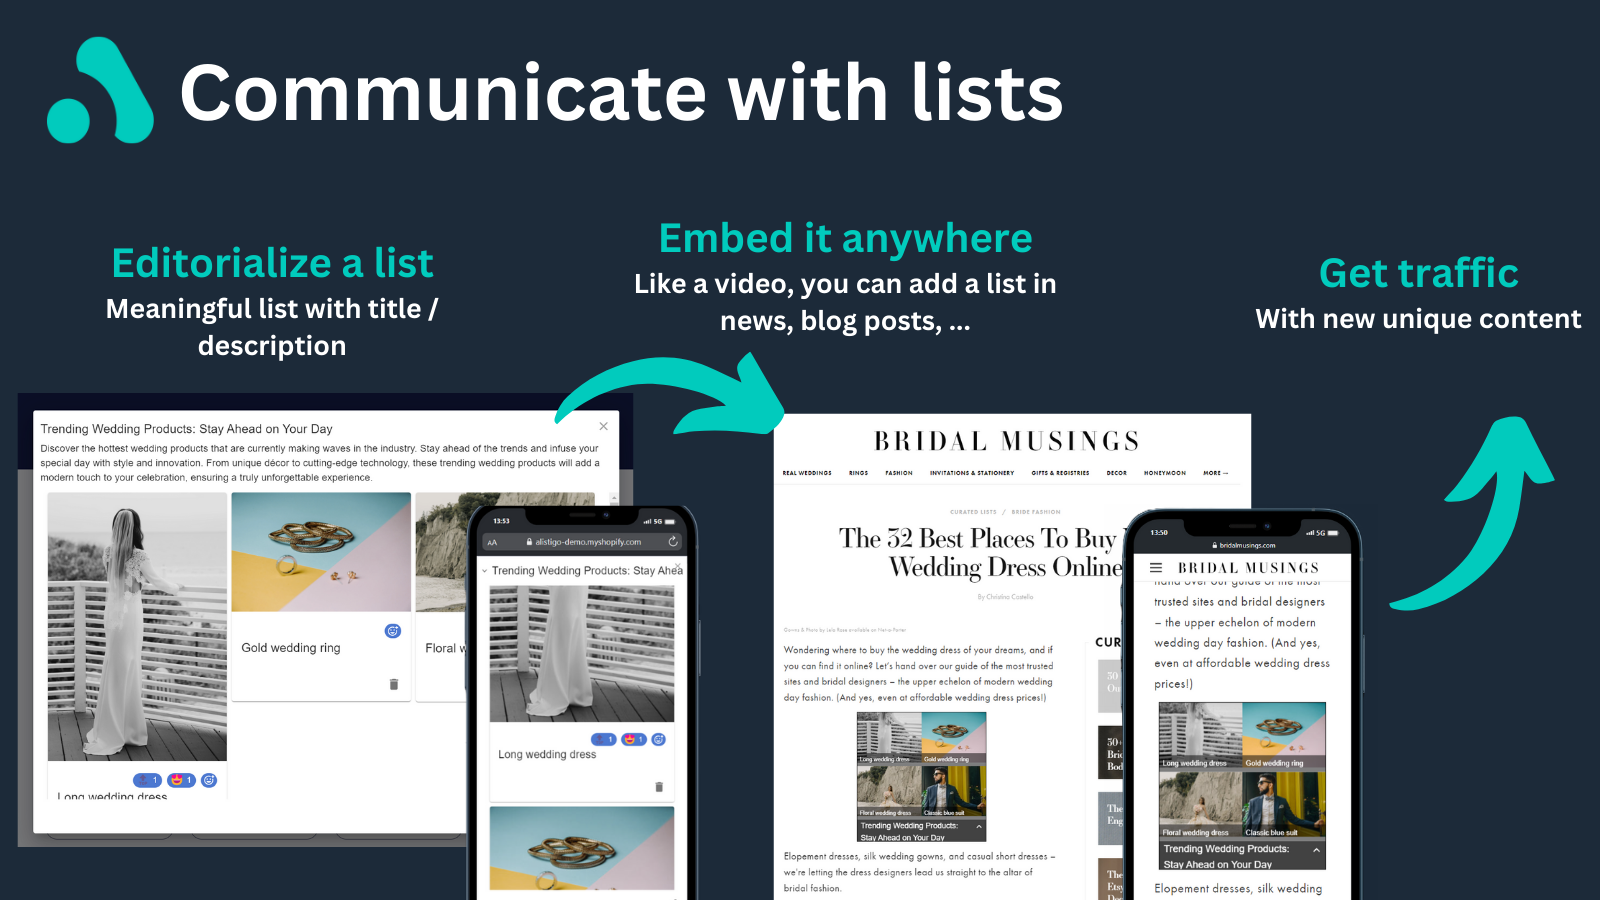 communicate with lists, editorialize lists, embed it anywhere